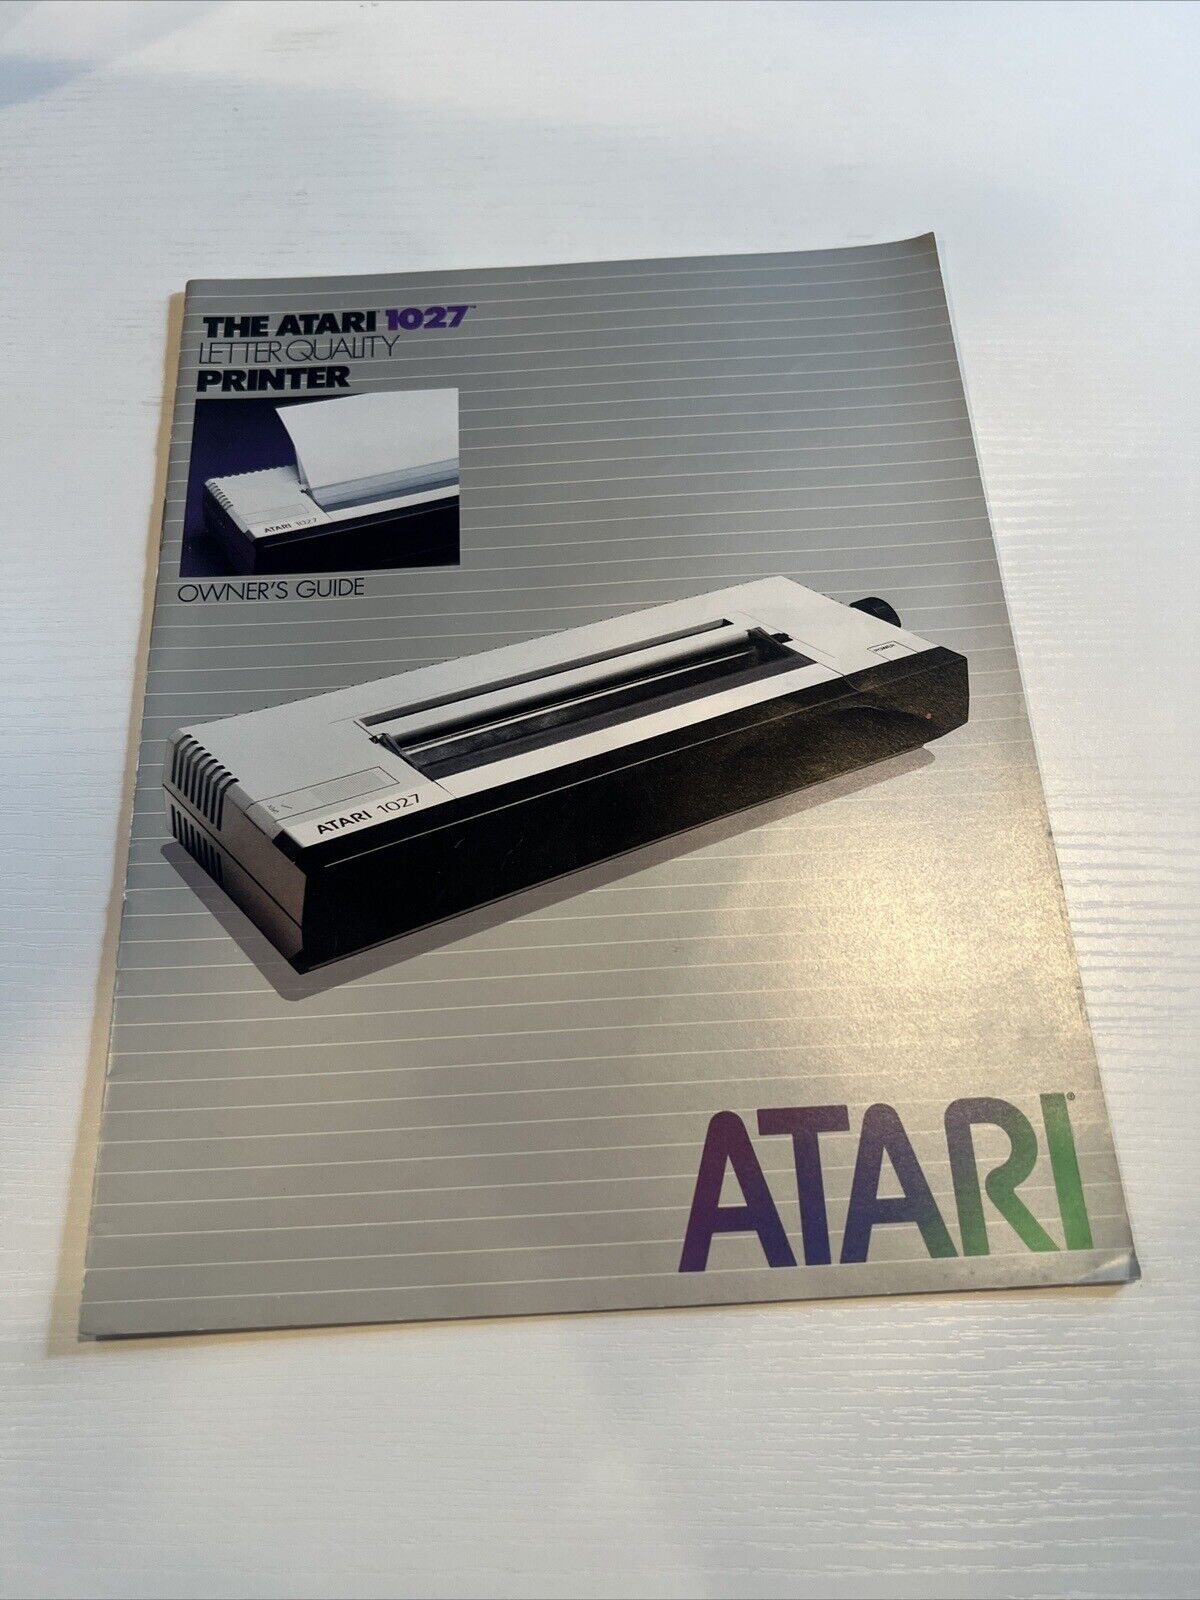 Atari 1027 Letter Quality Printer Owner's Manual/Guide - Complete